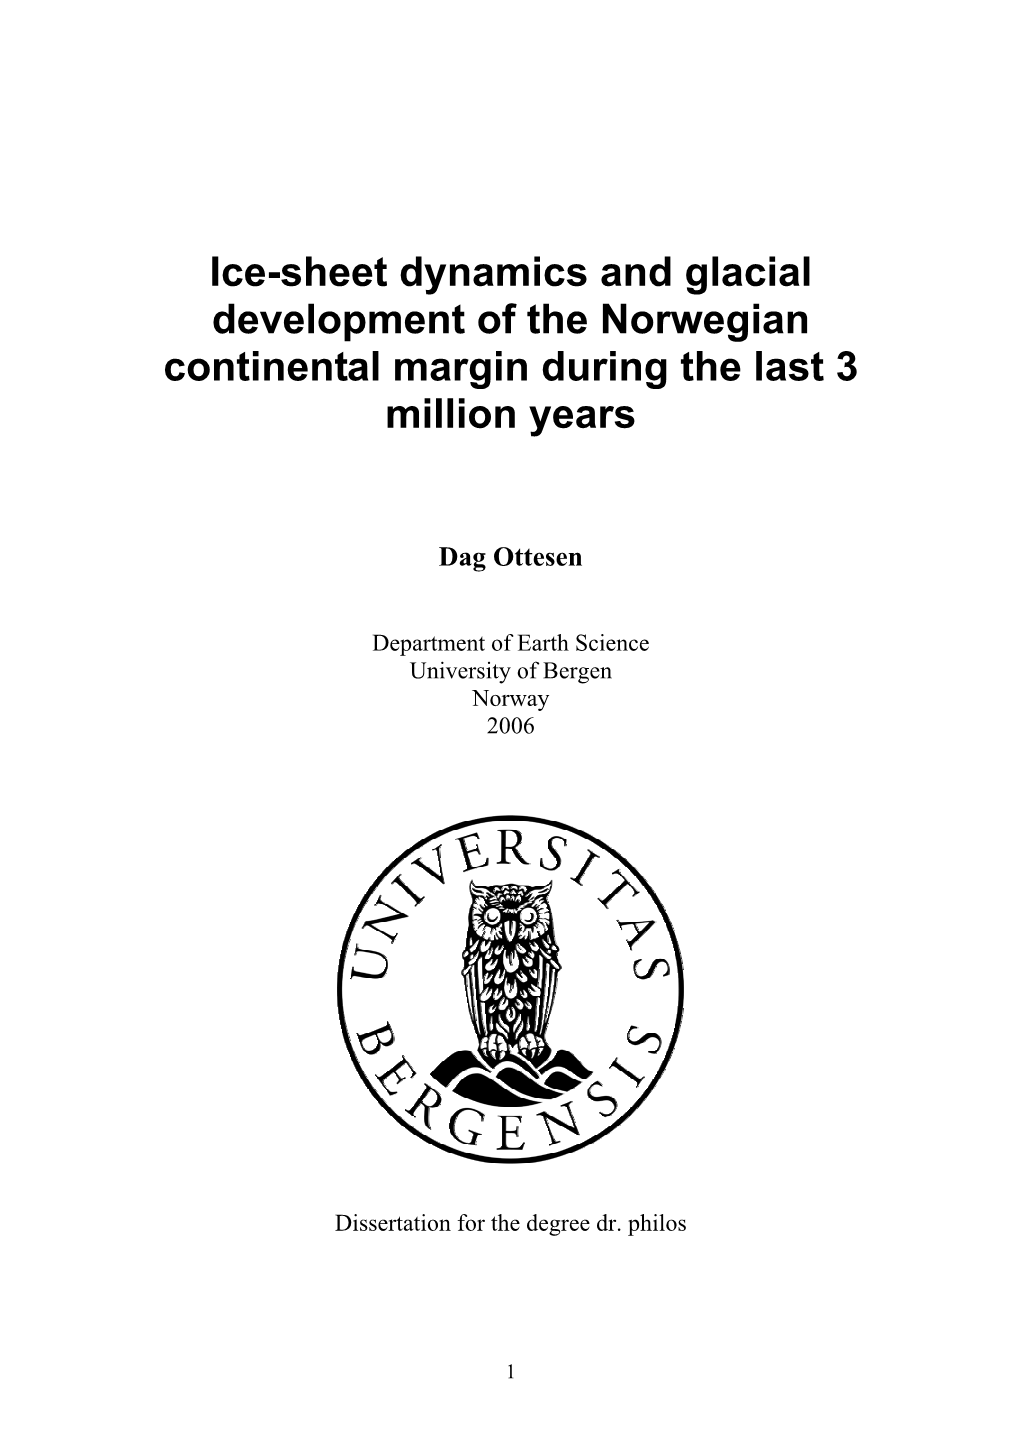 Thesis Is Mainly About the Dynamics of the Palaeo-Ice Sheets That Covered Scandinavia, Barents Sea and Svalbard During the Last Glaciation